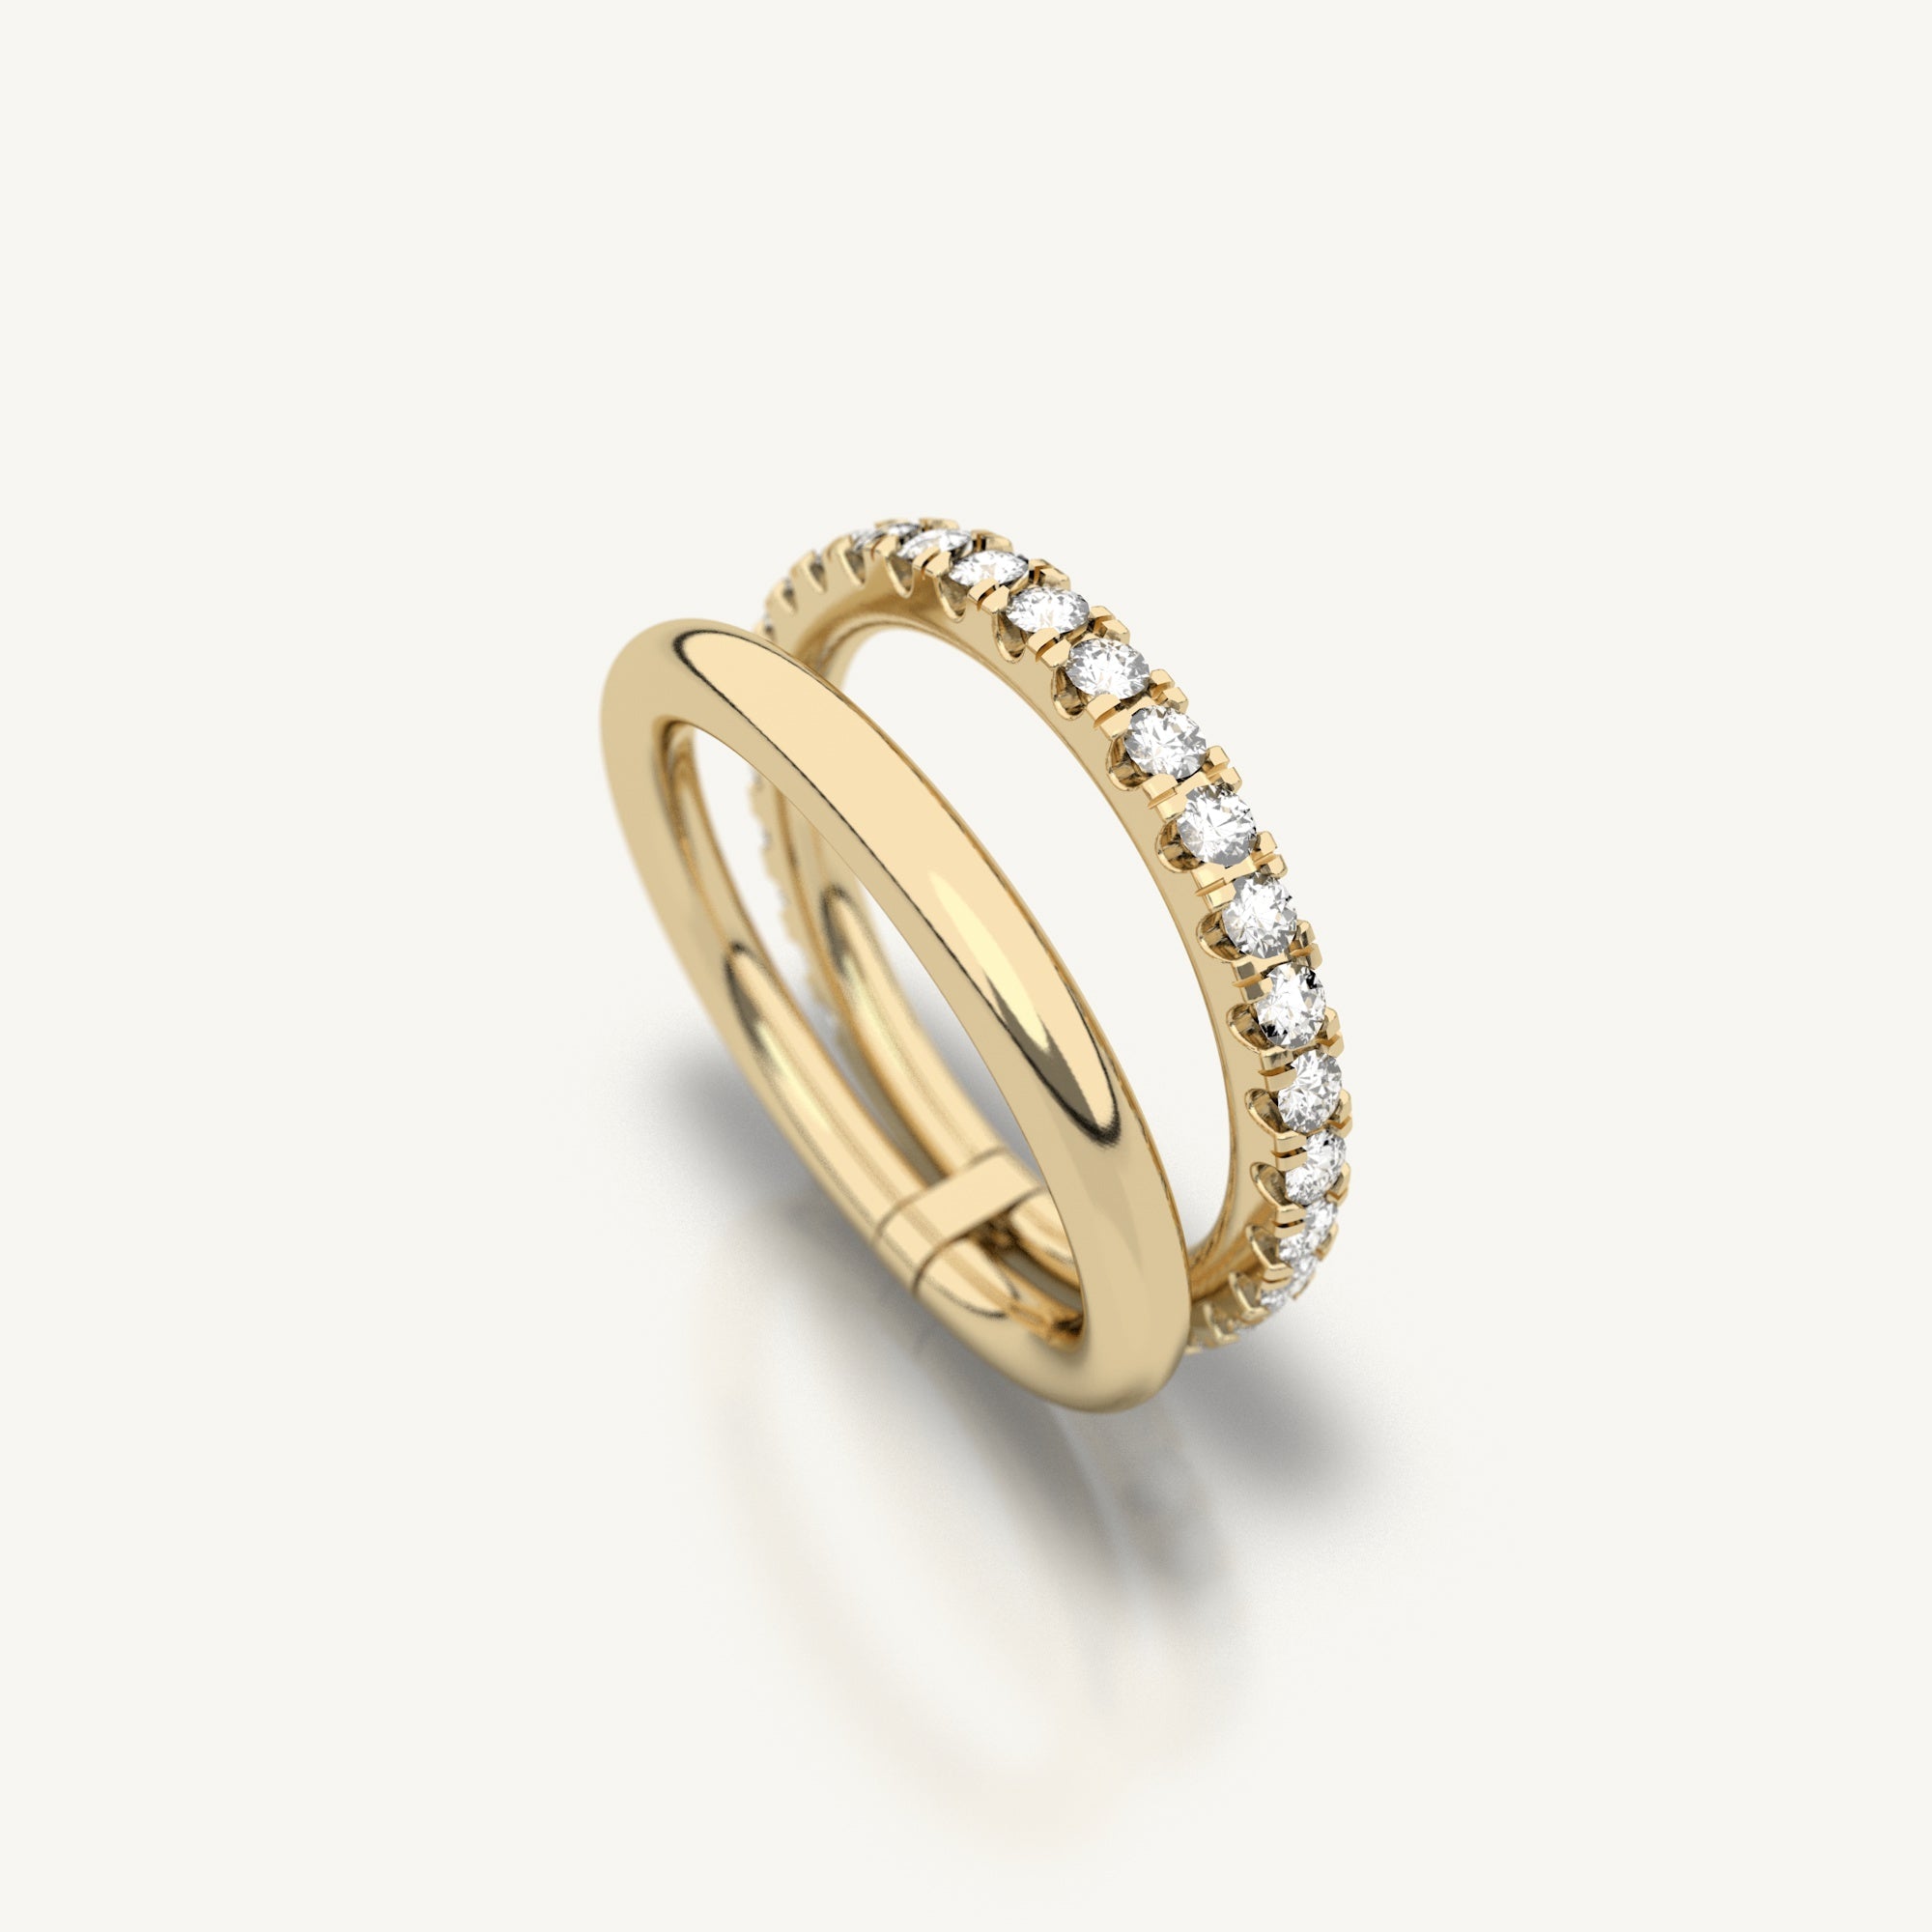 Yellow gold ring made from 18k recycled gold and lab grown diamonds